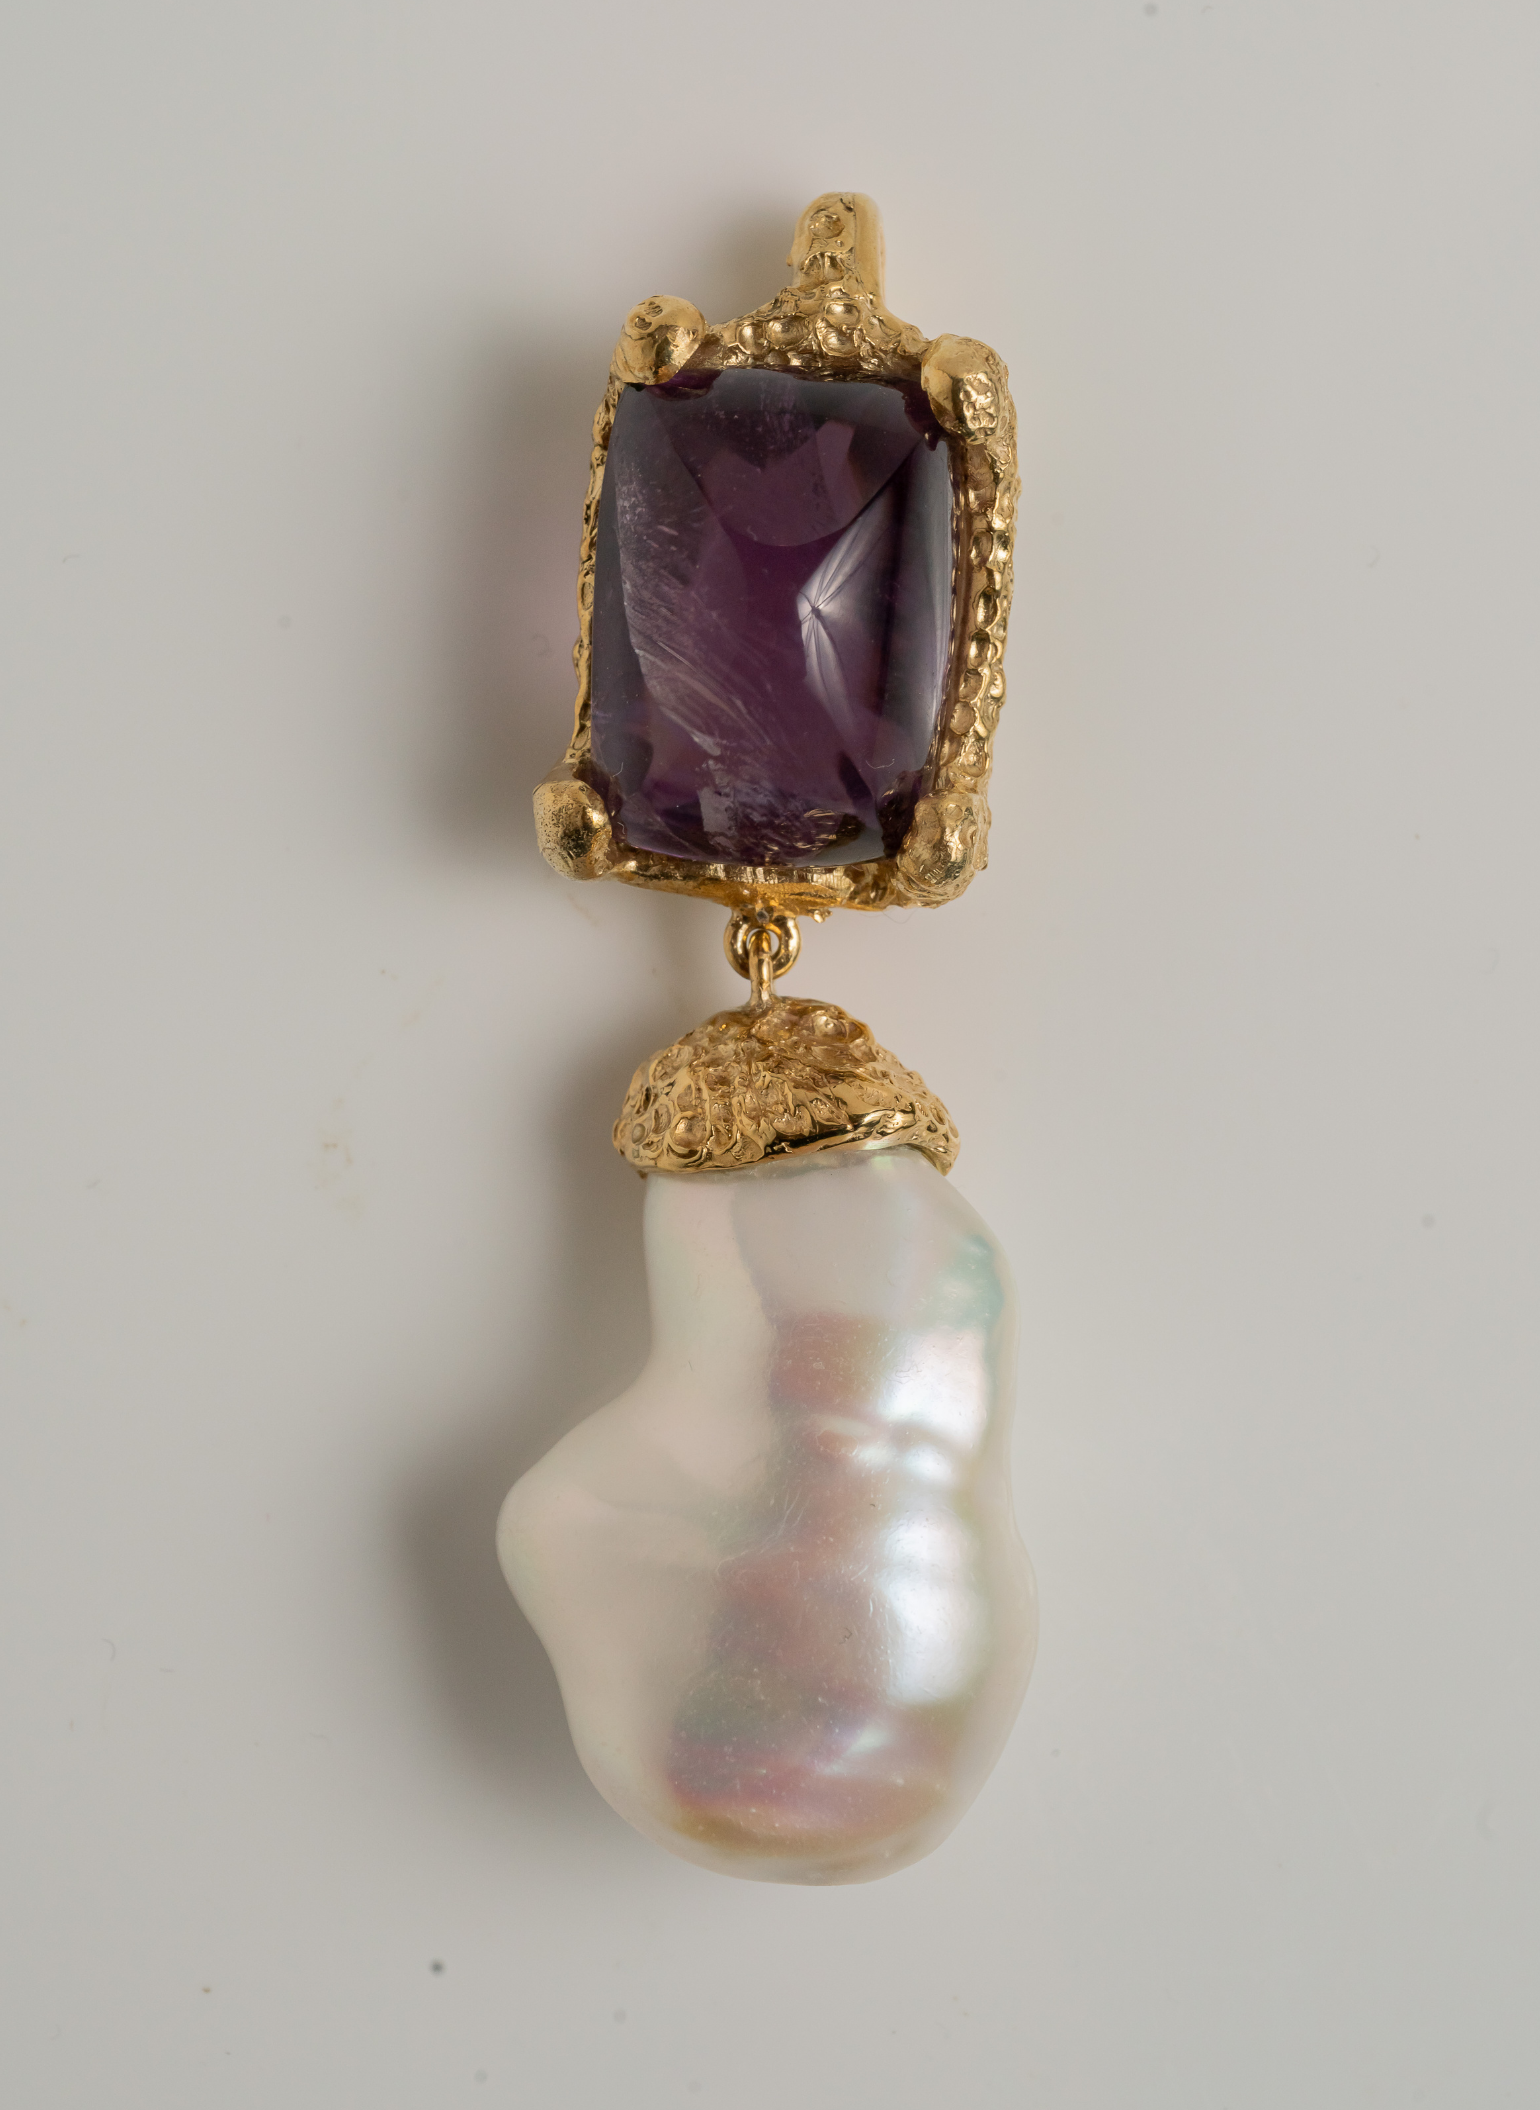 Dolce Far Niente Pearl and Amethyst Pendant